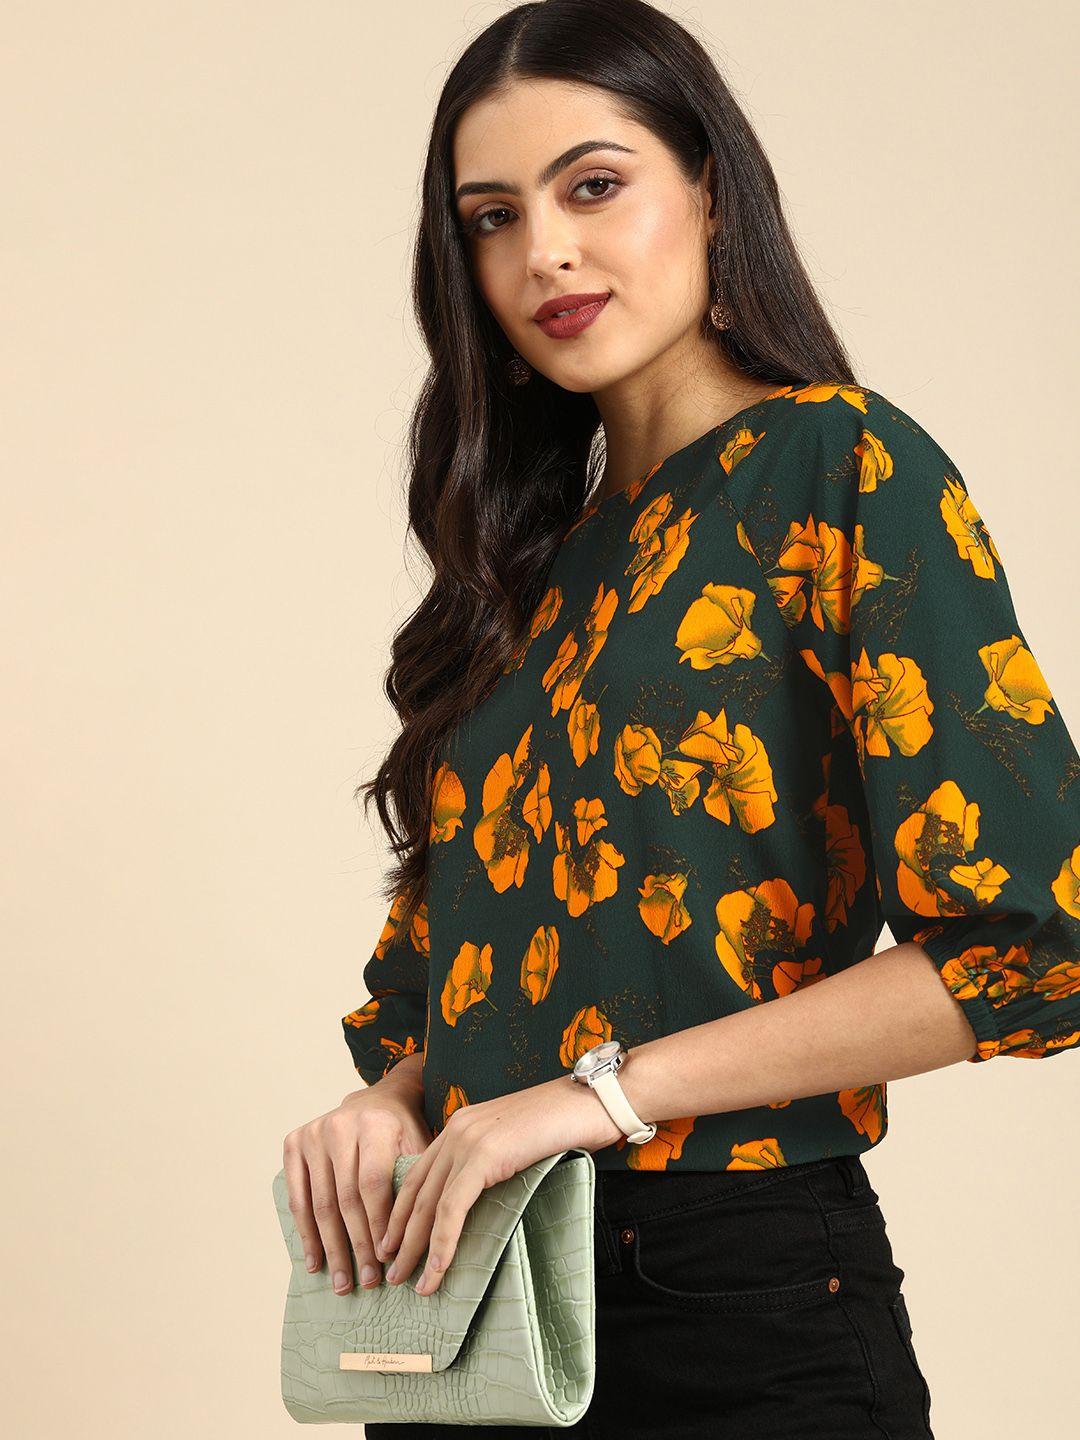 all-about-you-green-&-yellow-floral-printed-top